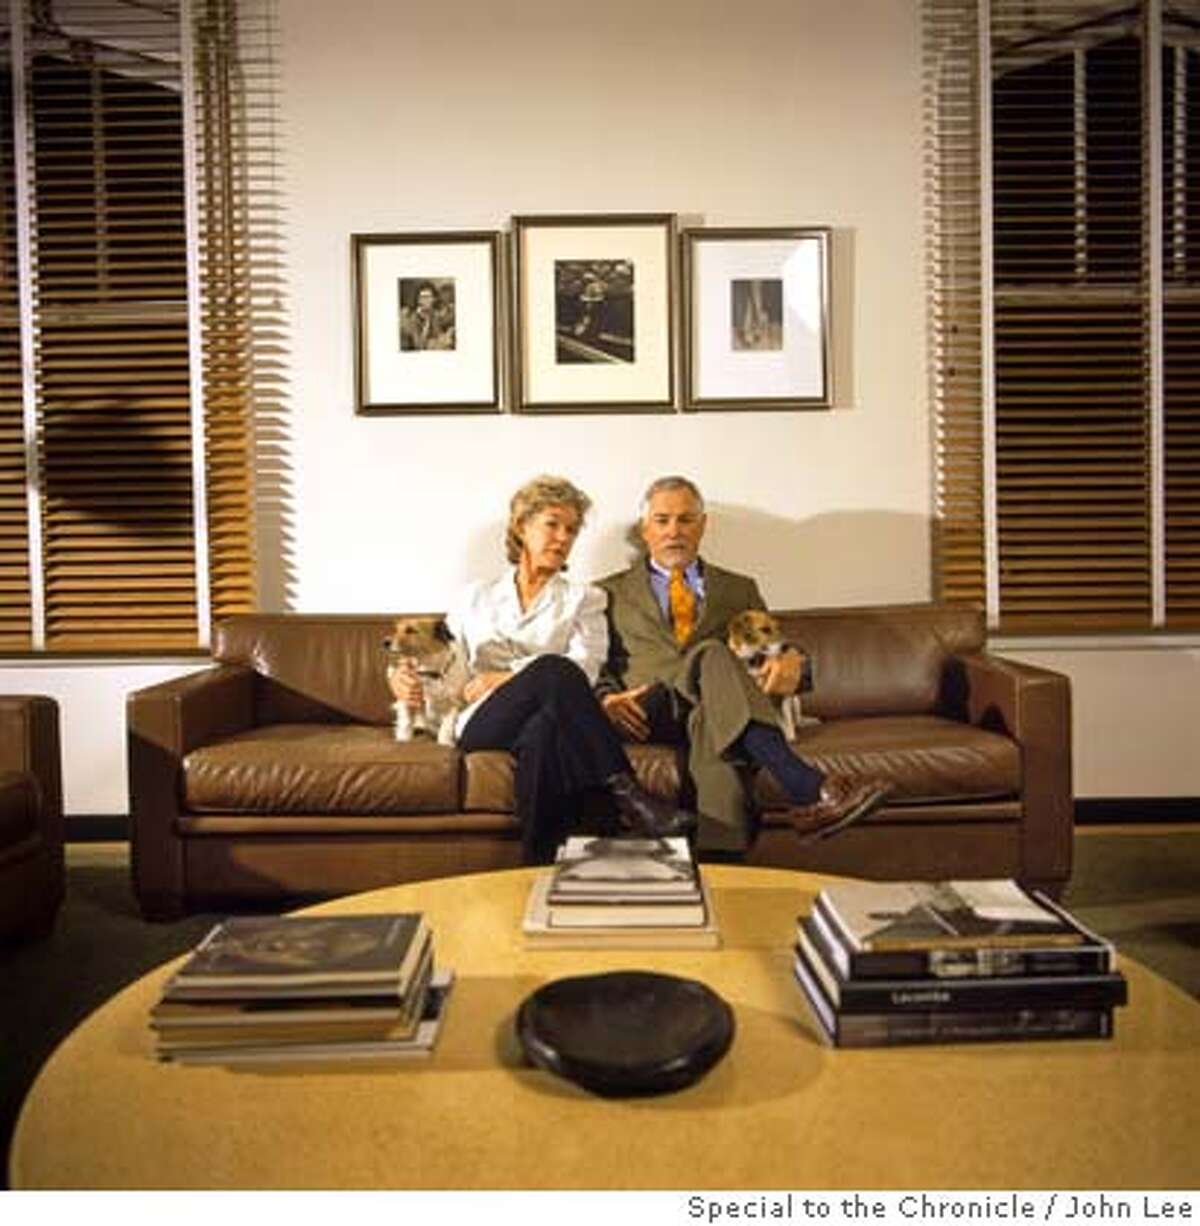 2500STEINER_BUELLS03JOHNLEE.JPG Susie Tompkins Buell, left, and he husband Mark Buell, sitting with their two dogs in the living room of their 12th floor penthouse condo at 2500 Steiner in San Francisco's Pacific Heights. For Sam Whiting story on 2500 Steiner. By JOHN LEE/SPECIAL TO THE CHRONICLE